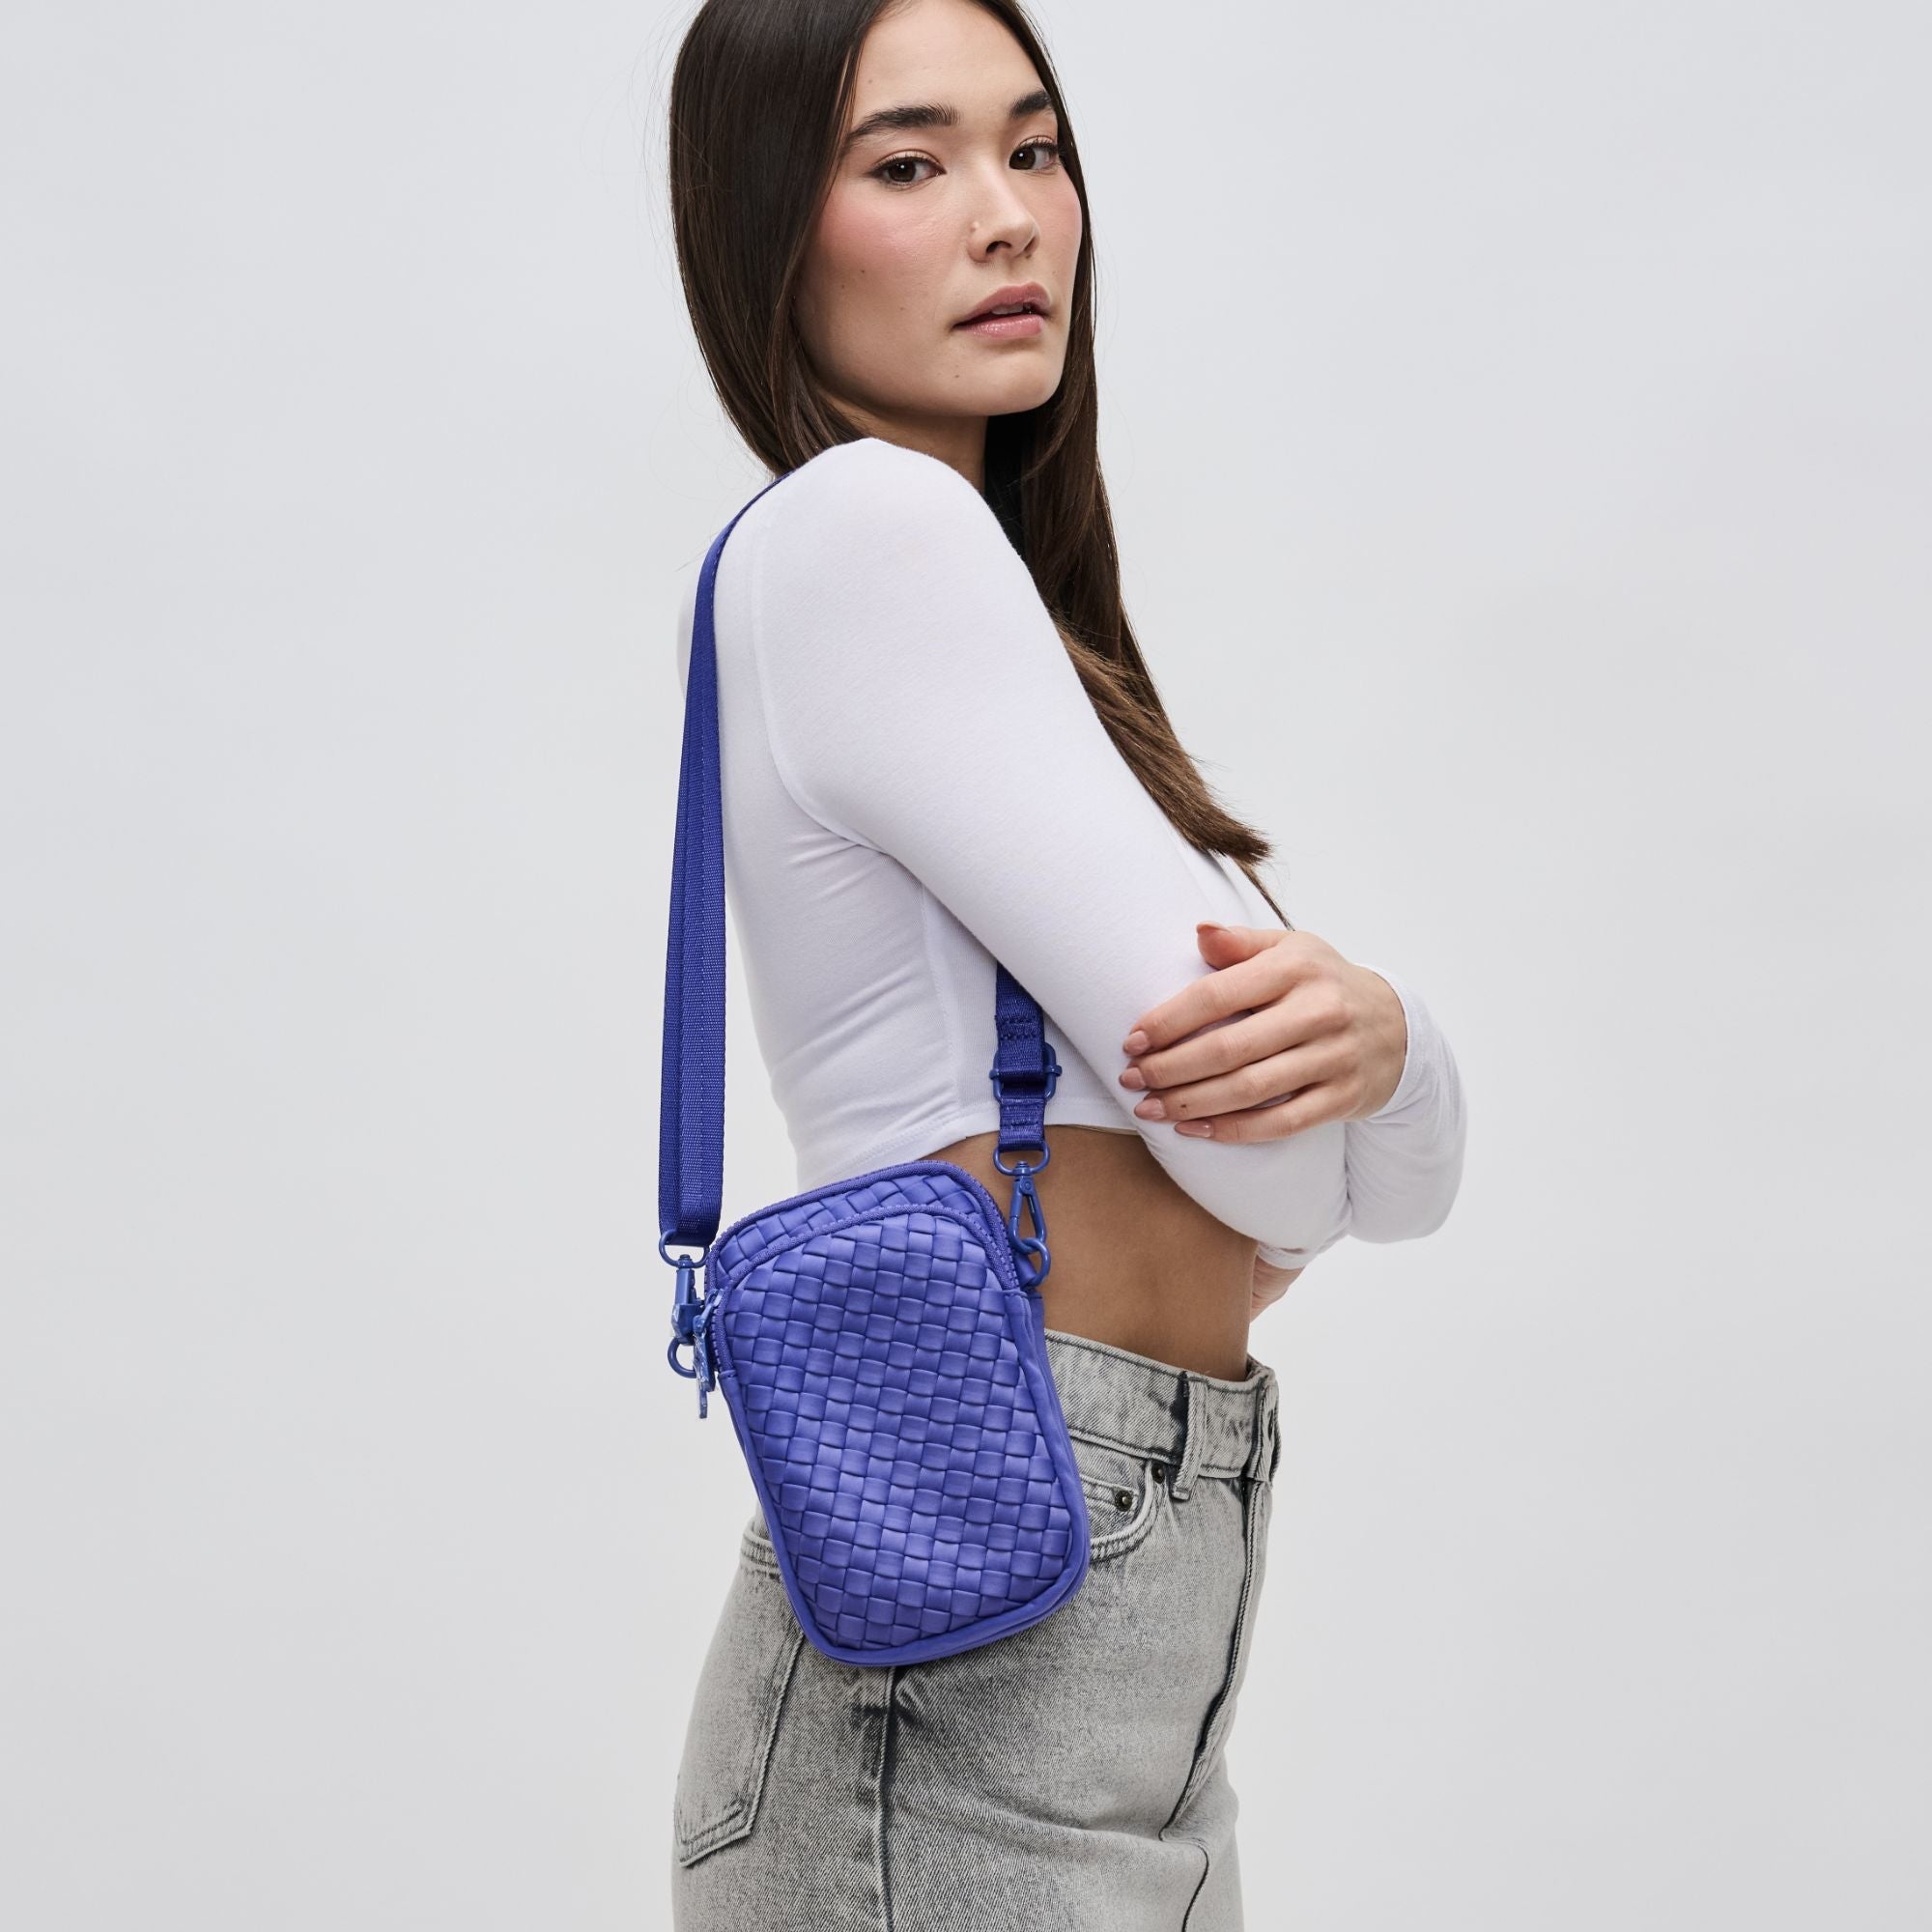 a model in a white top carrying a woven purple crossbody phone bag